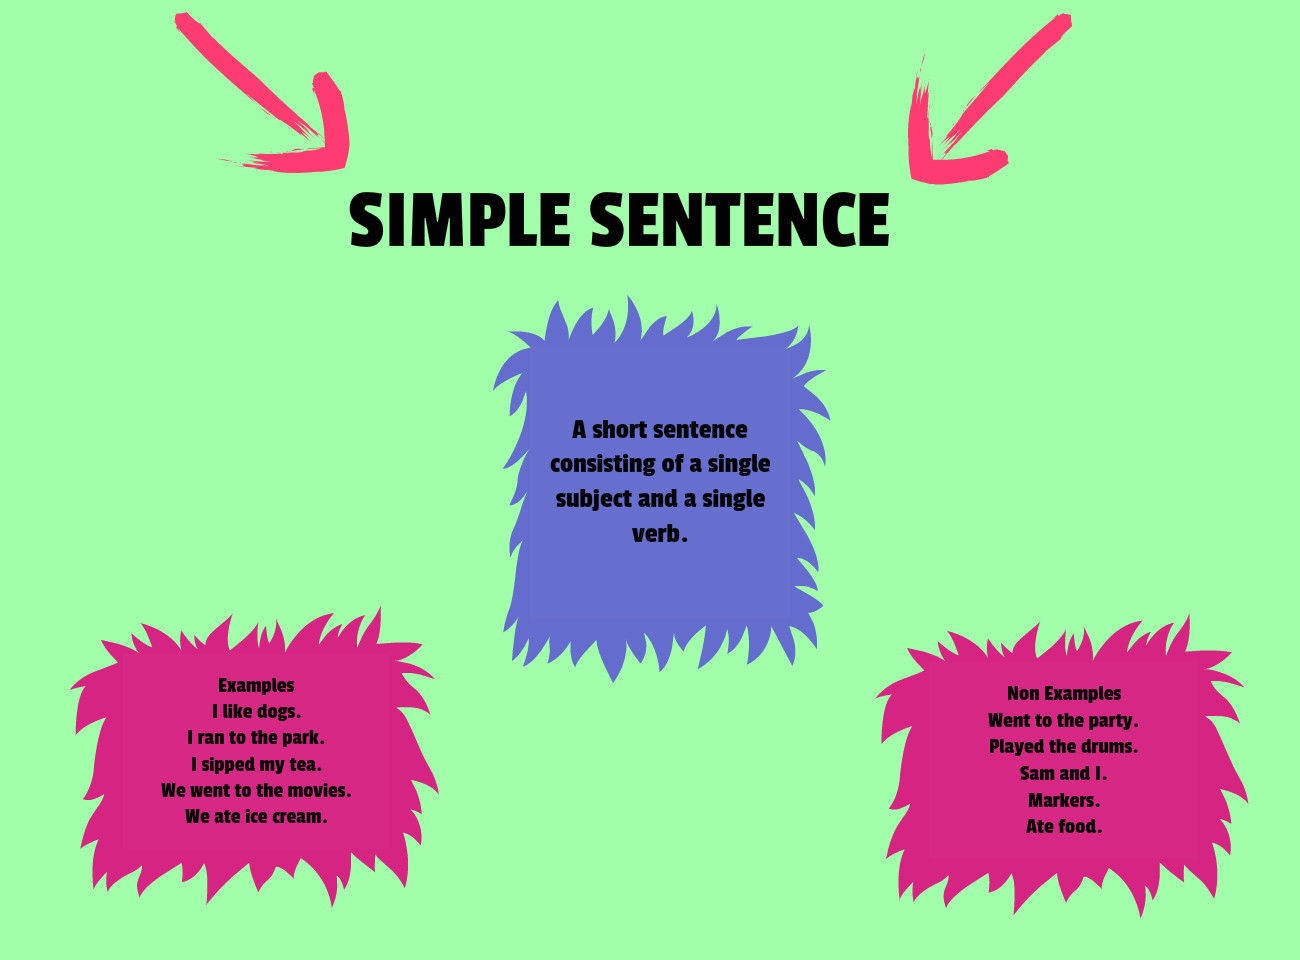 50+ Examples of Simple Sentences, Types, Subject, and How it Works